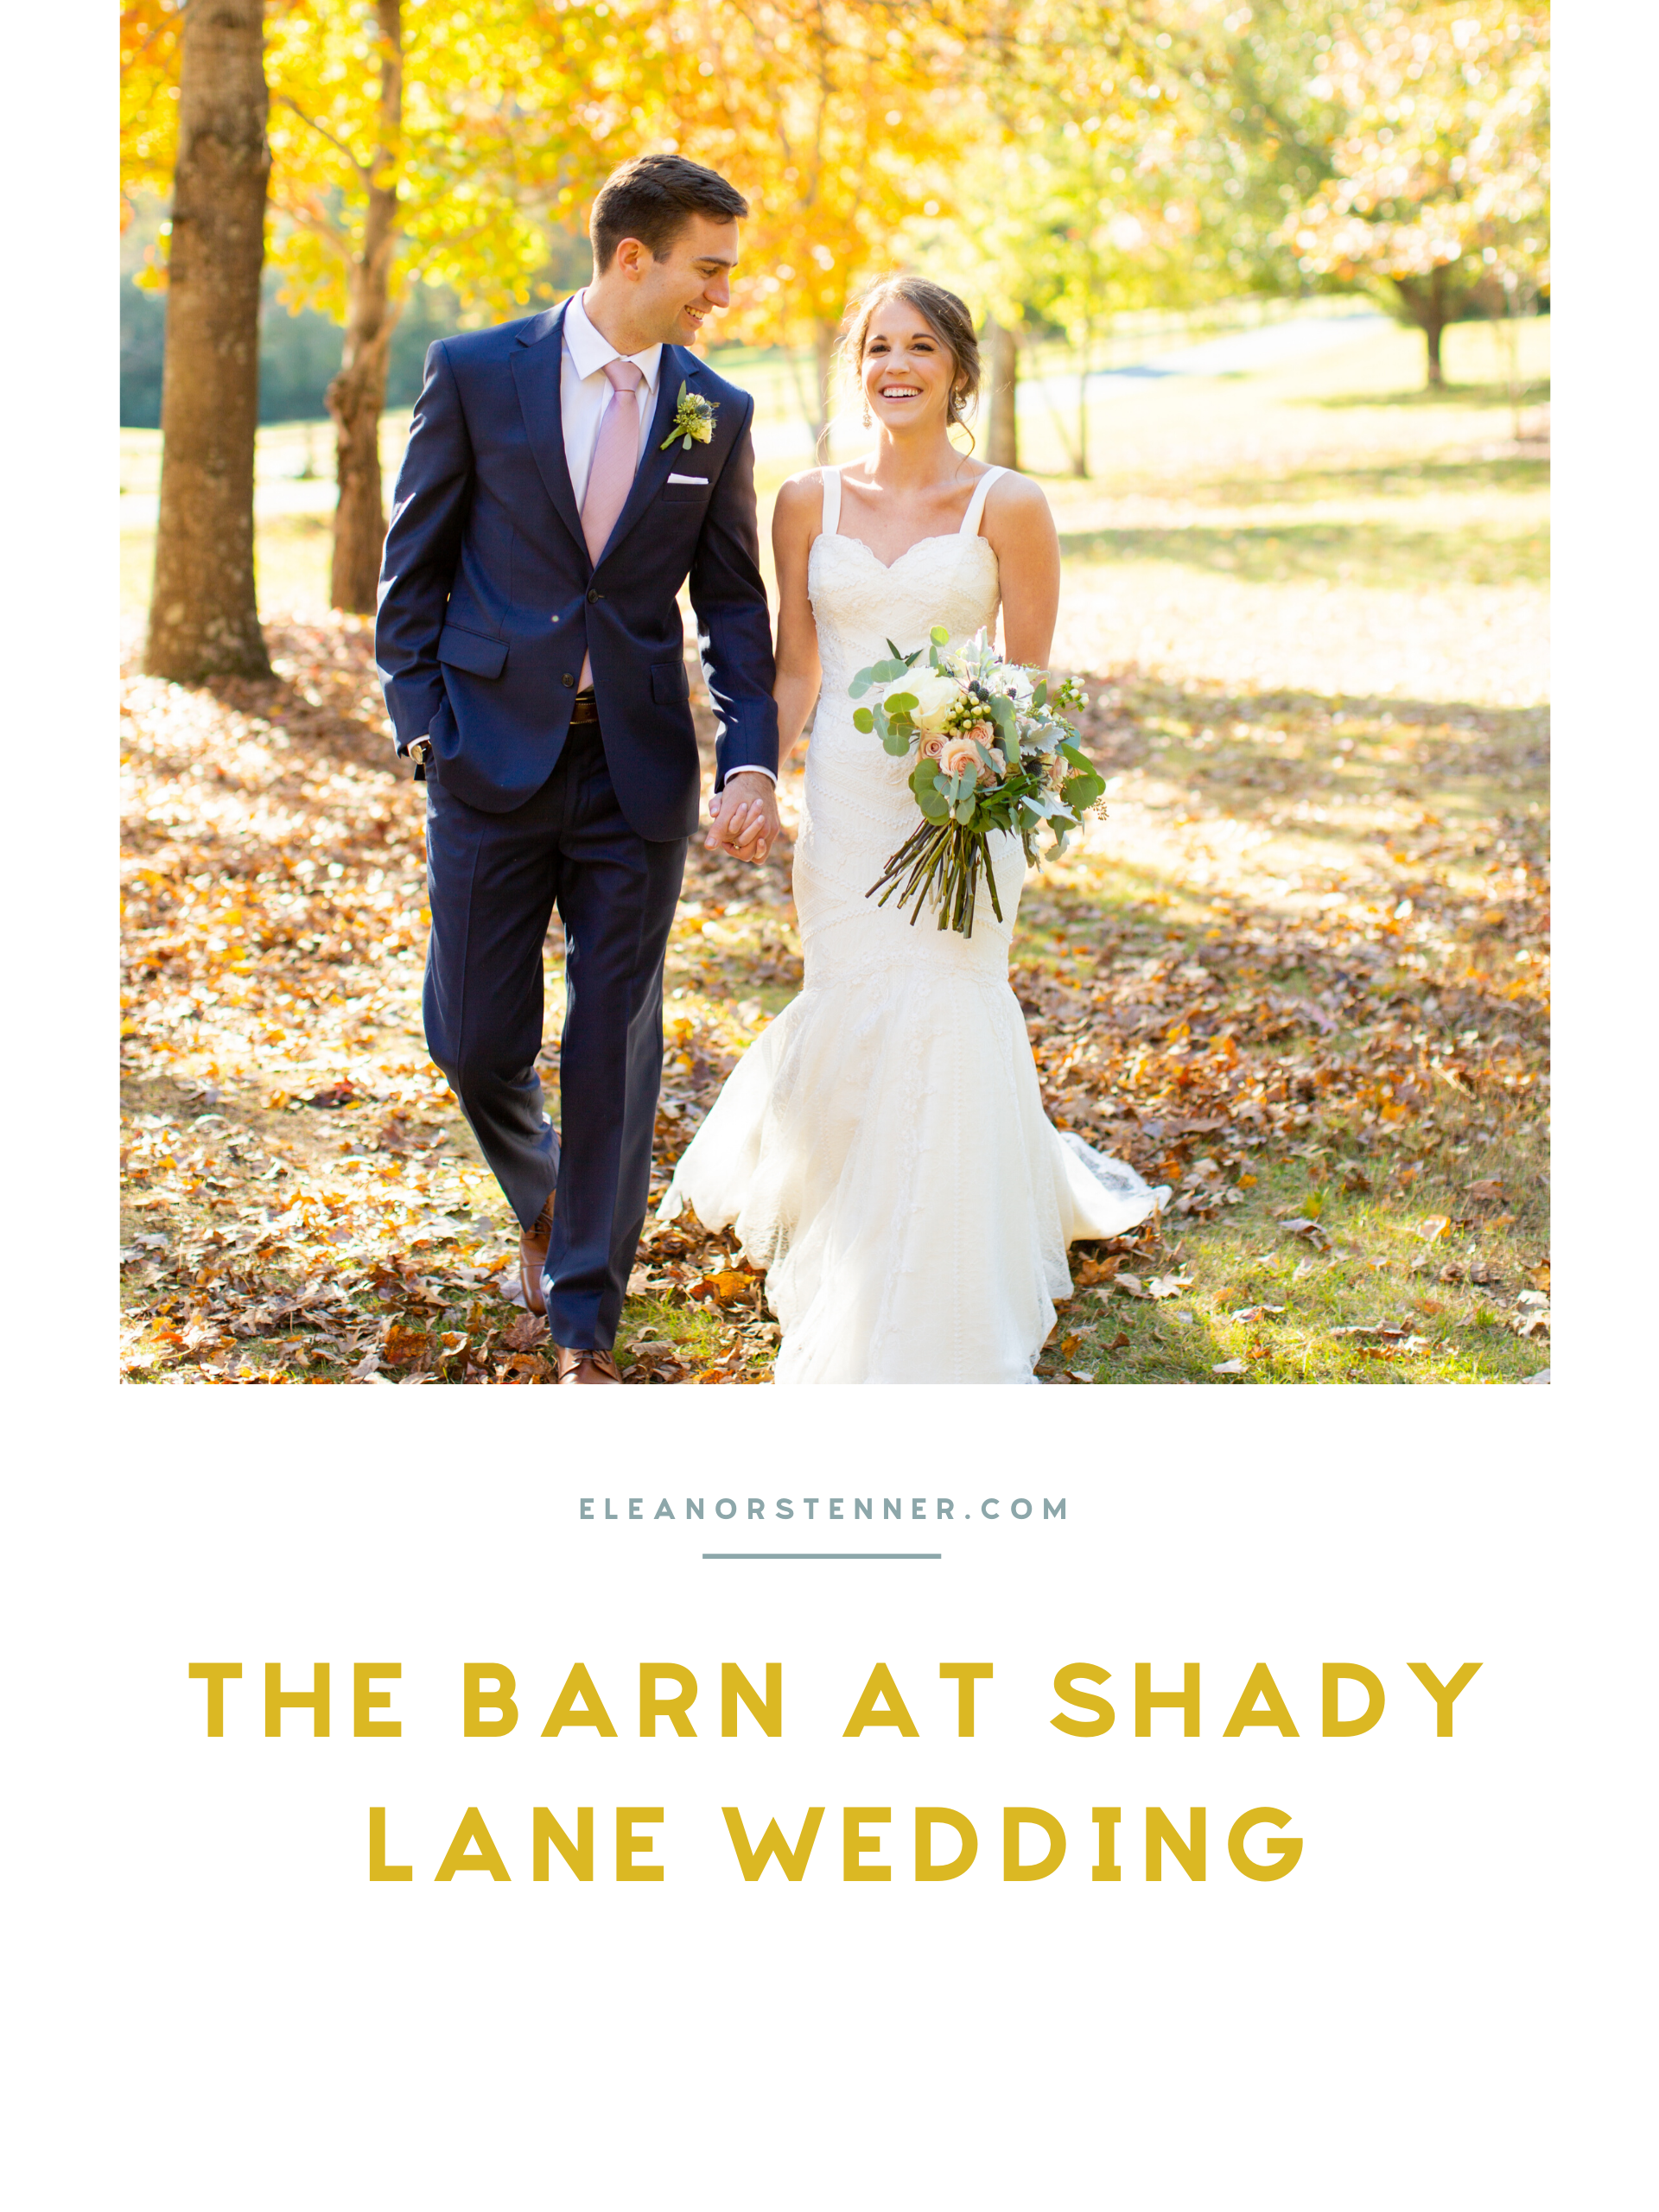 My best friend married the love of her life at The Barn at Shady Lane in Birmingham, Alabama. November weddings at the barn are just majestic!